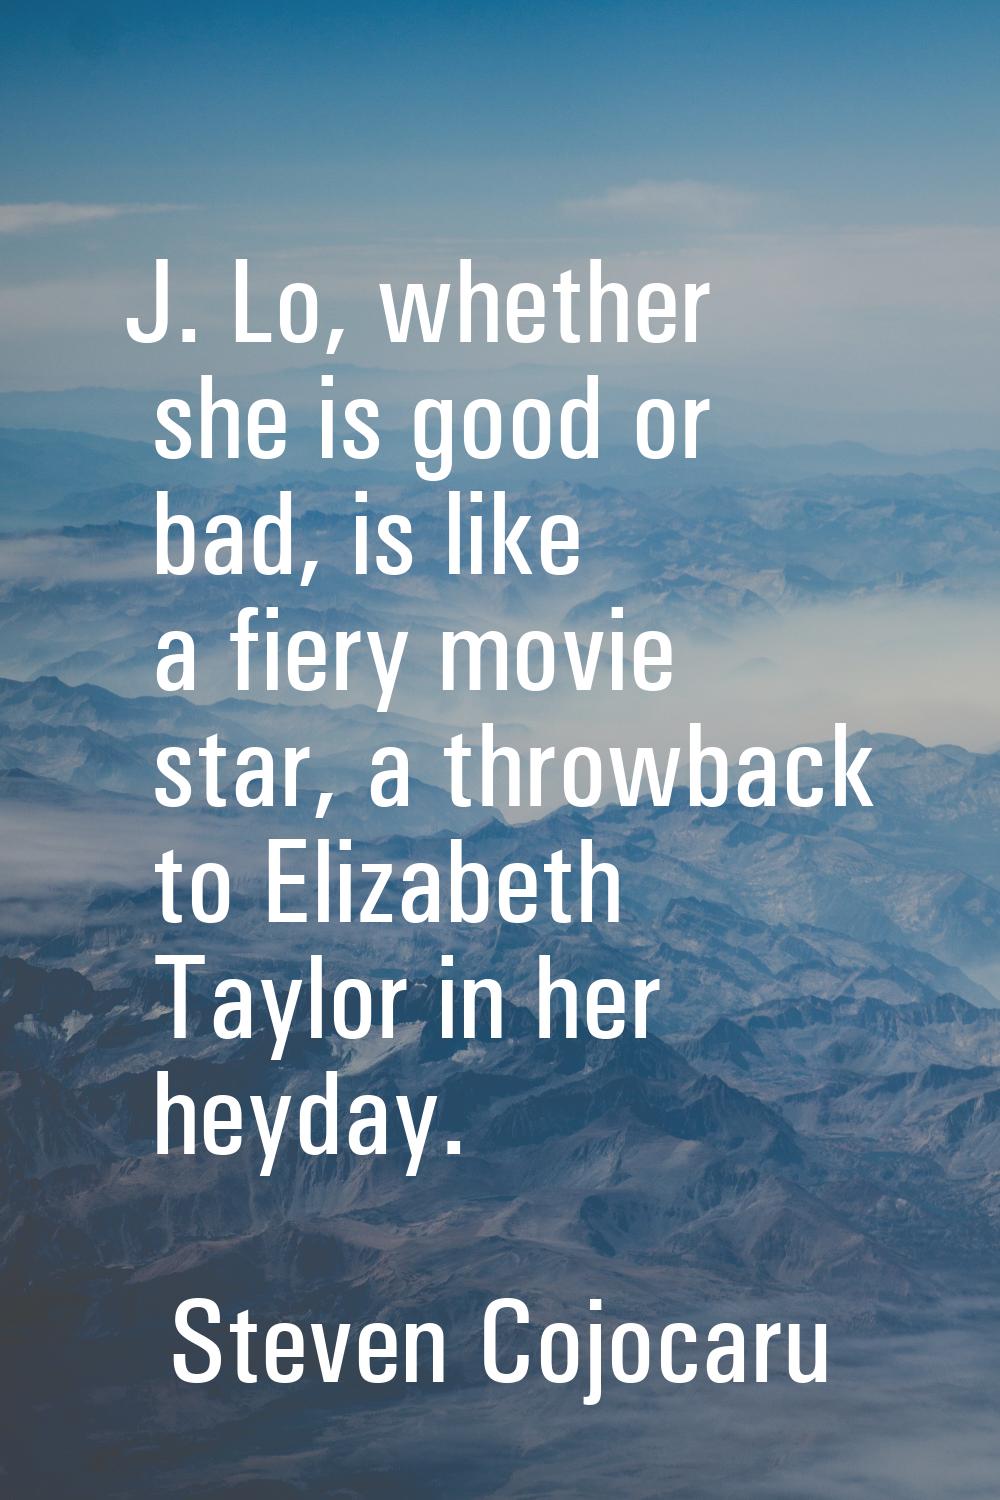 J. Lo, whether she is good or bad, is like a fiery movie star, a throwback to Elizabeth Taylor in h